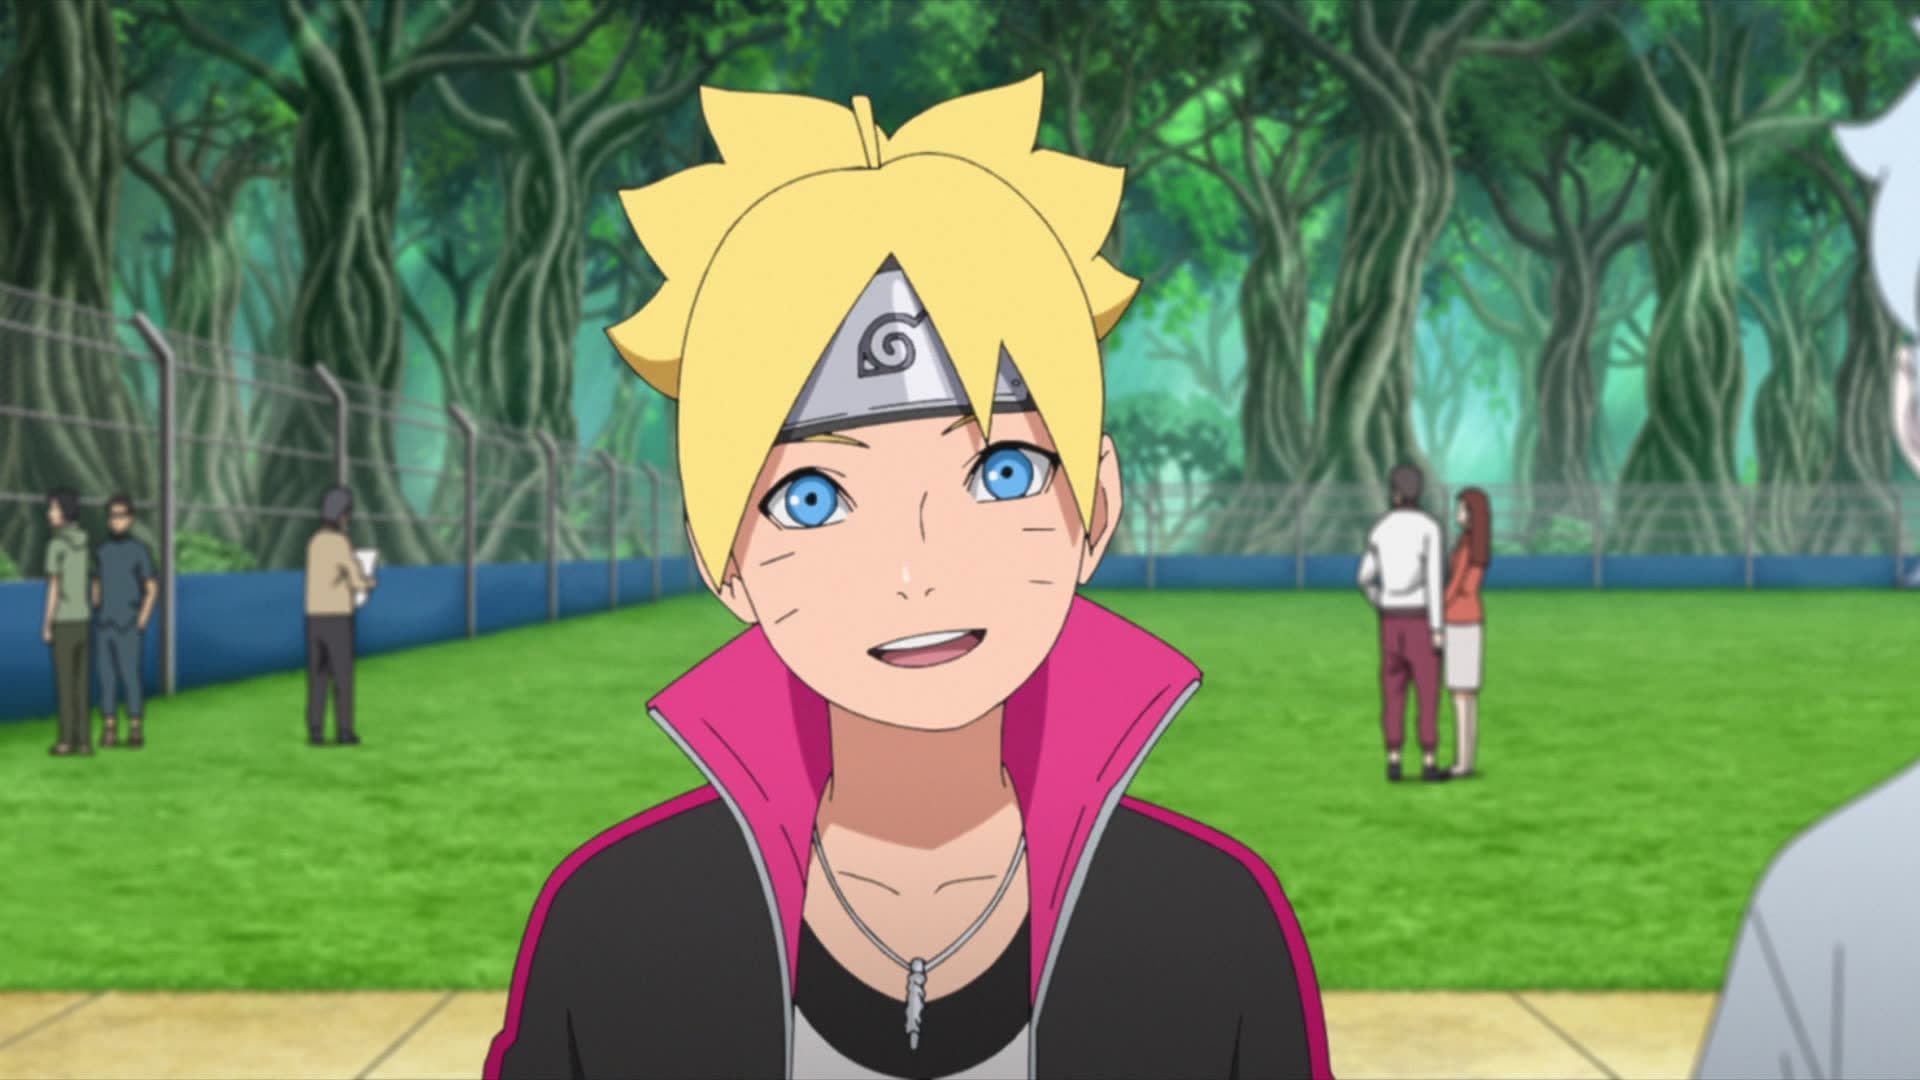 The Boruto Anime Is Reportedly Going on Hiatus This Summer